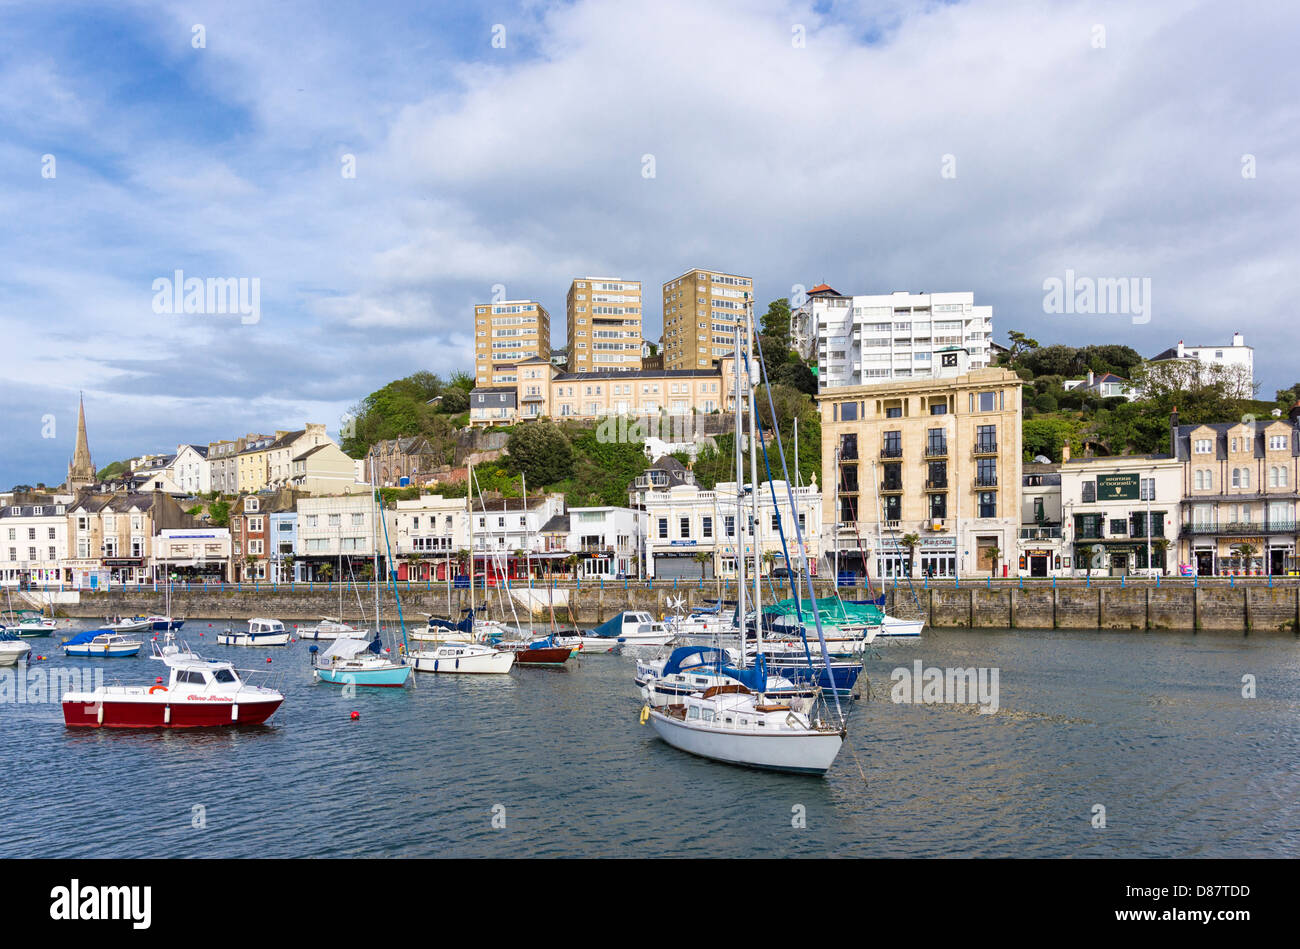 Torquay, Devon, England, UK - view of town and harbour Stock Photo